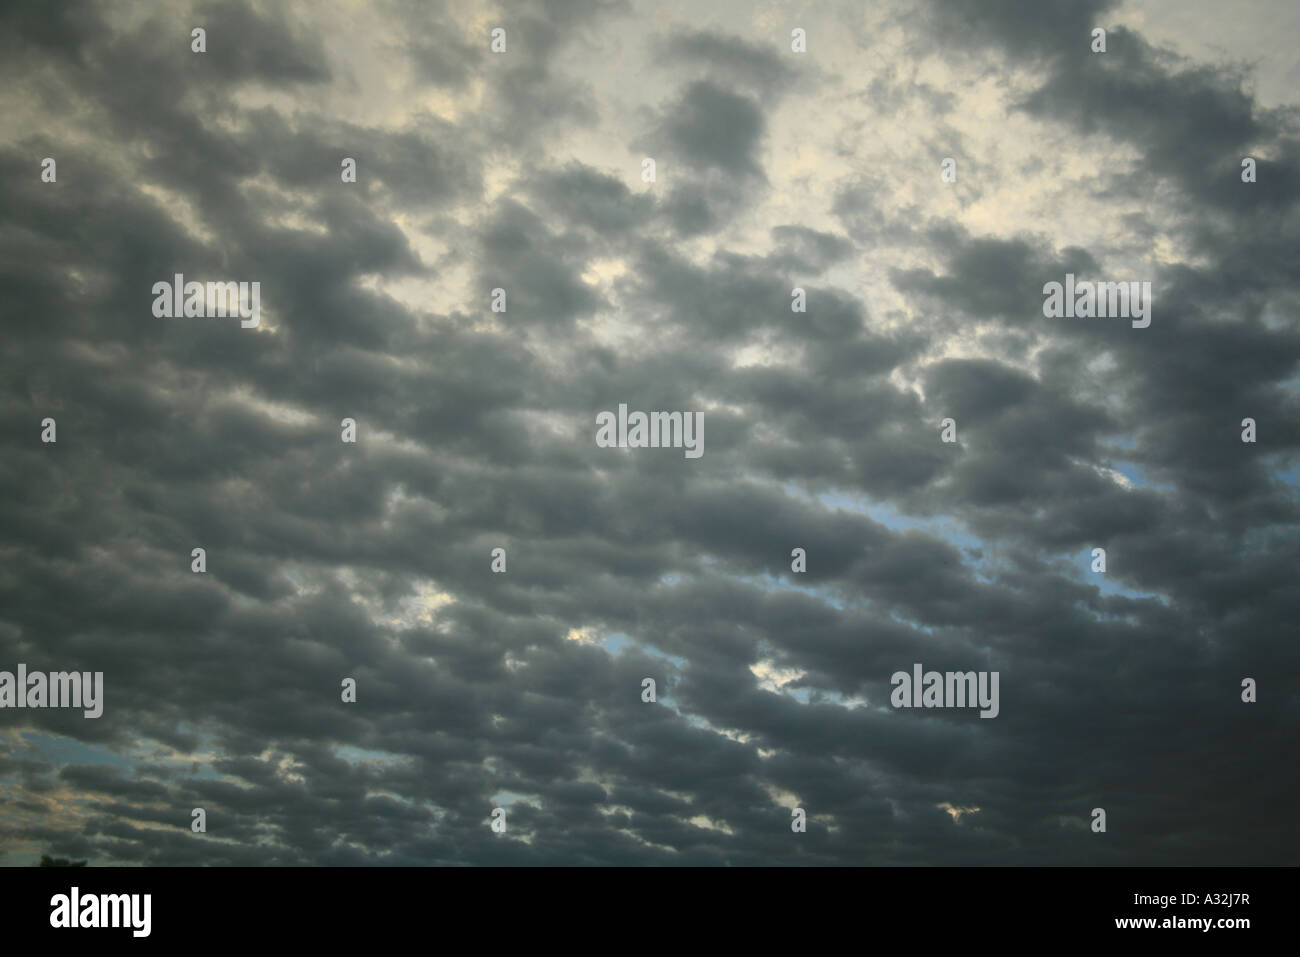 Sky with rows of dark altostratus clouds, Holland Stock Photo